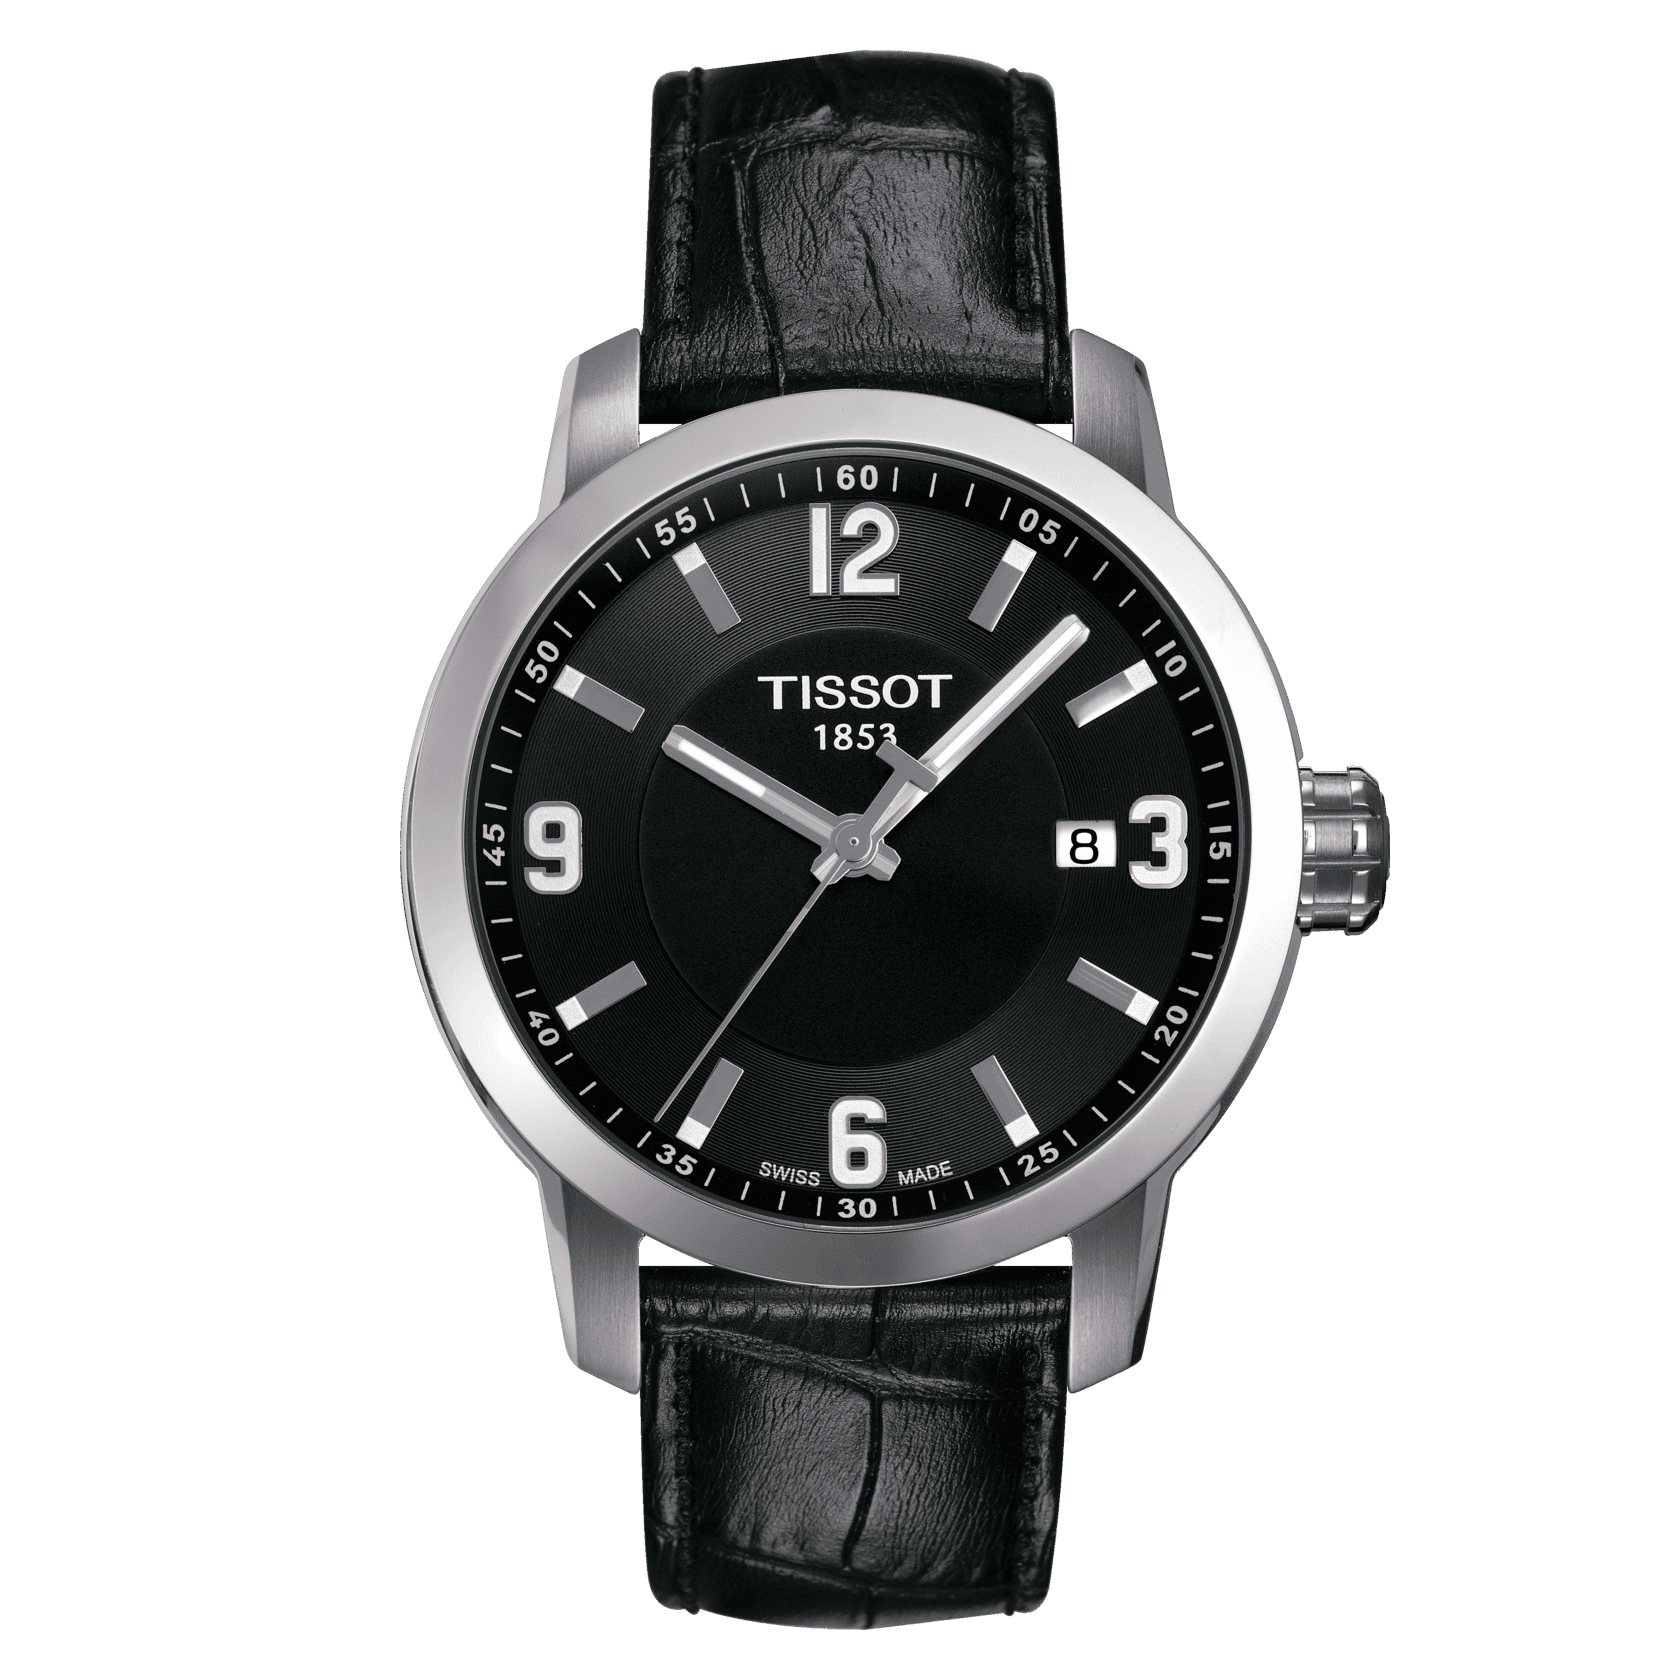 TISSOT PRC 200 (T055.410.16.057.00)
316L stainless steel case
screw-down crown and caseback
Scratch-resistant sapphire crystal
Black Dial with arabic and indexes
Quartz</li>
Black Leather Strap with butterfly clasp
Water-resistant up to a pressure